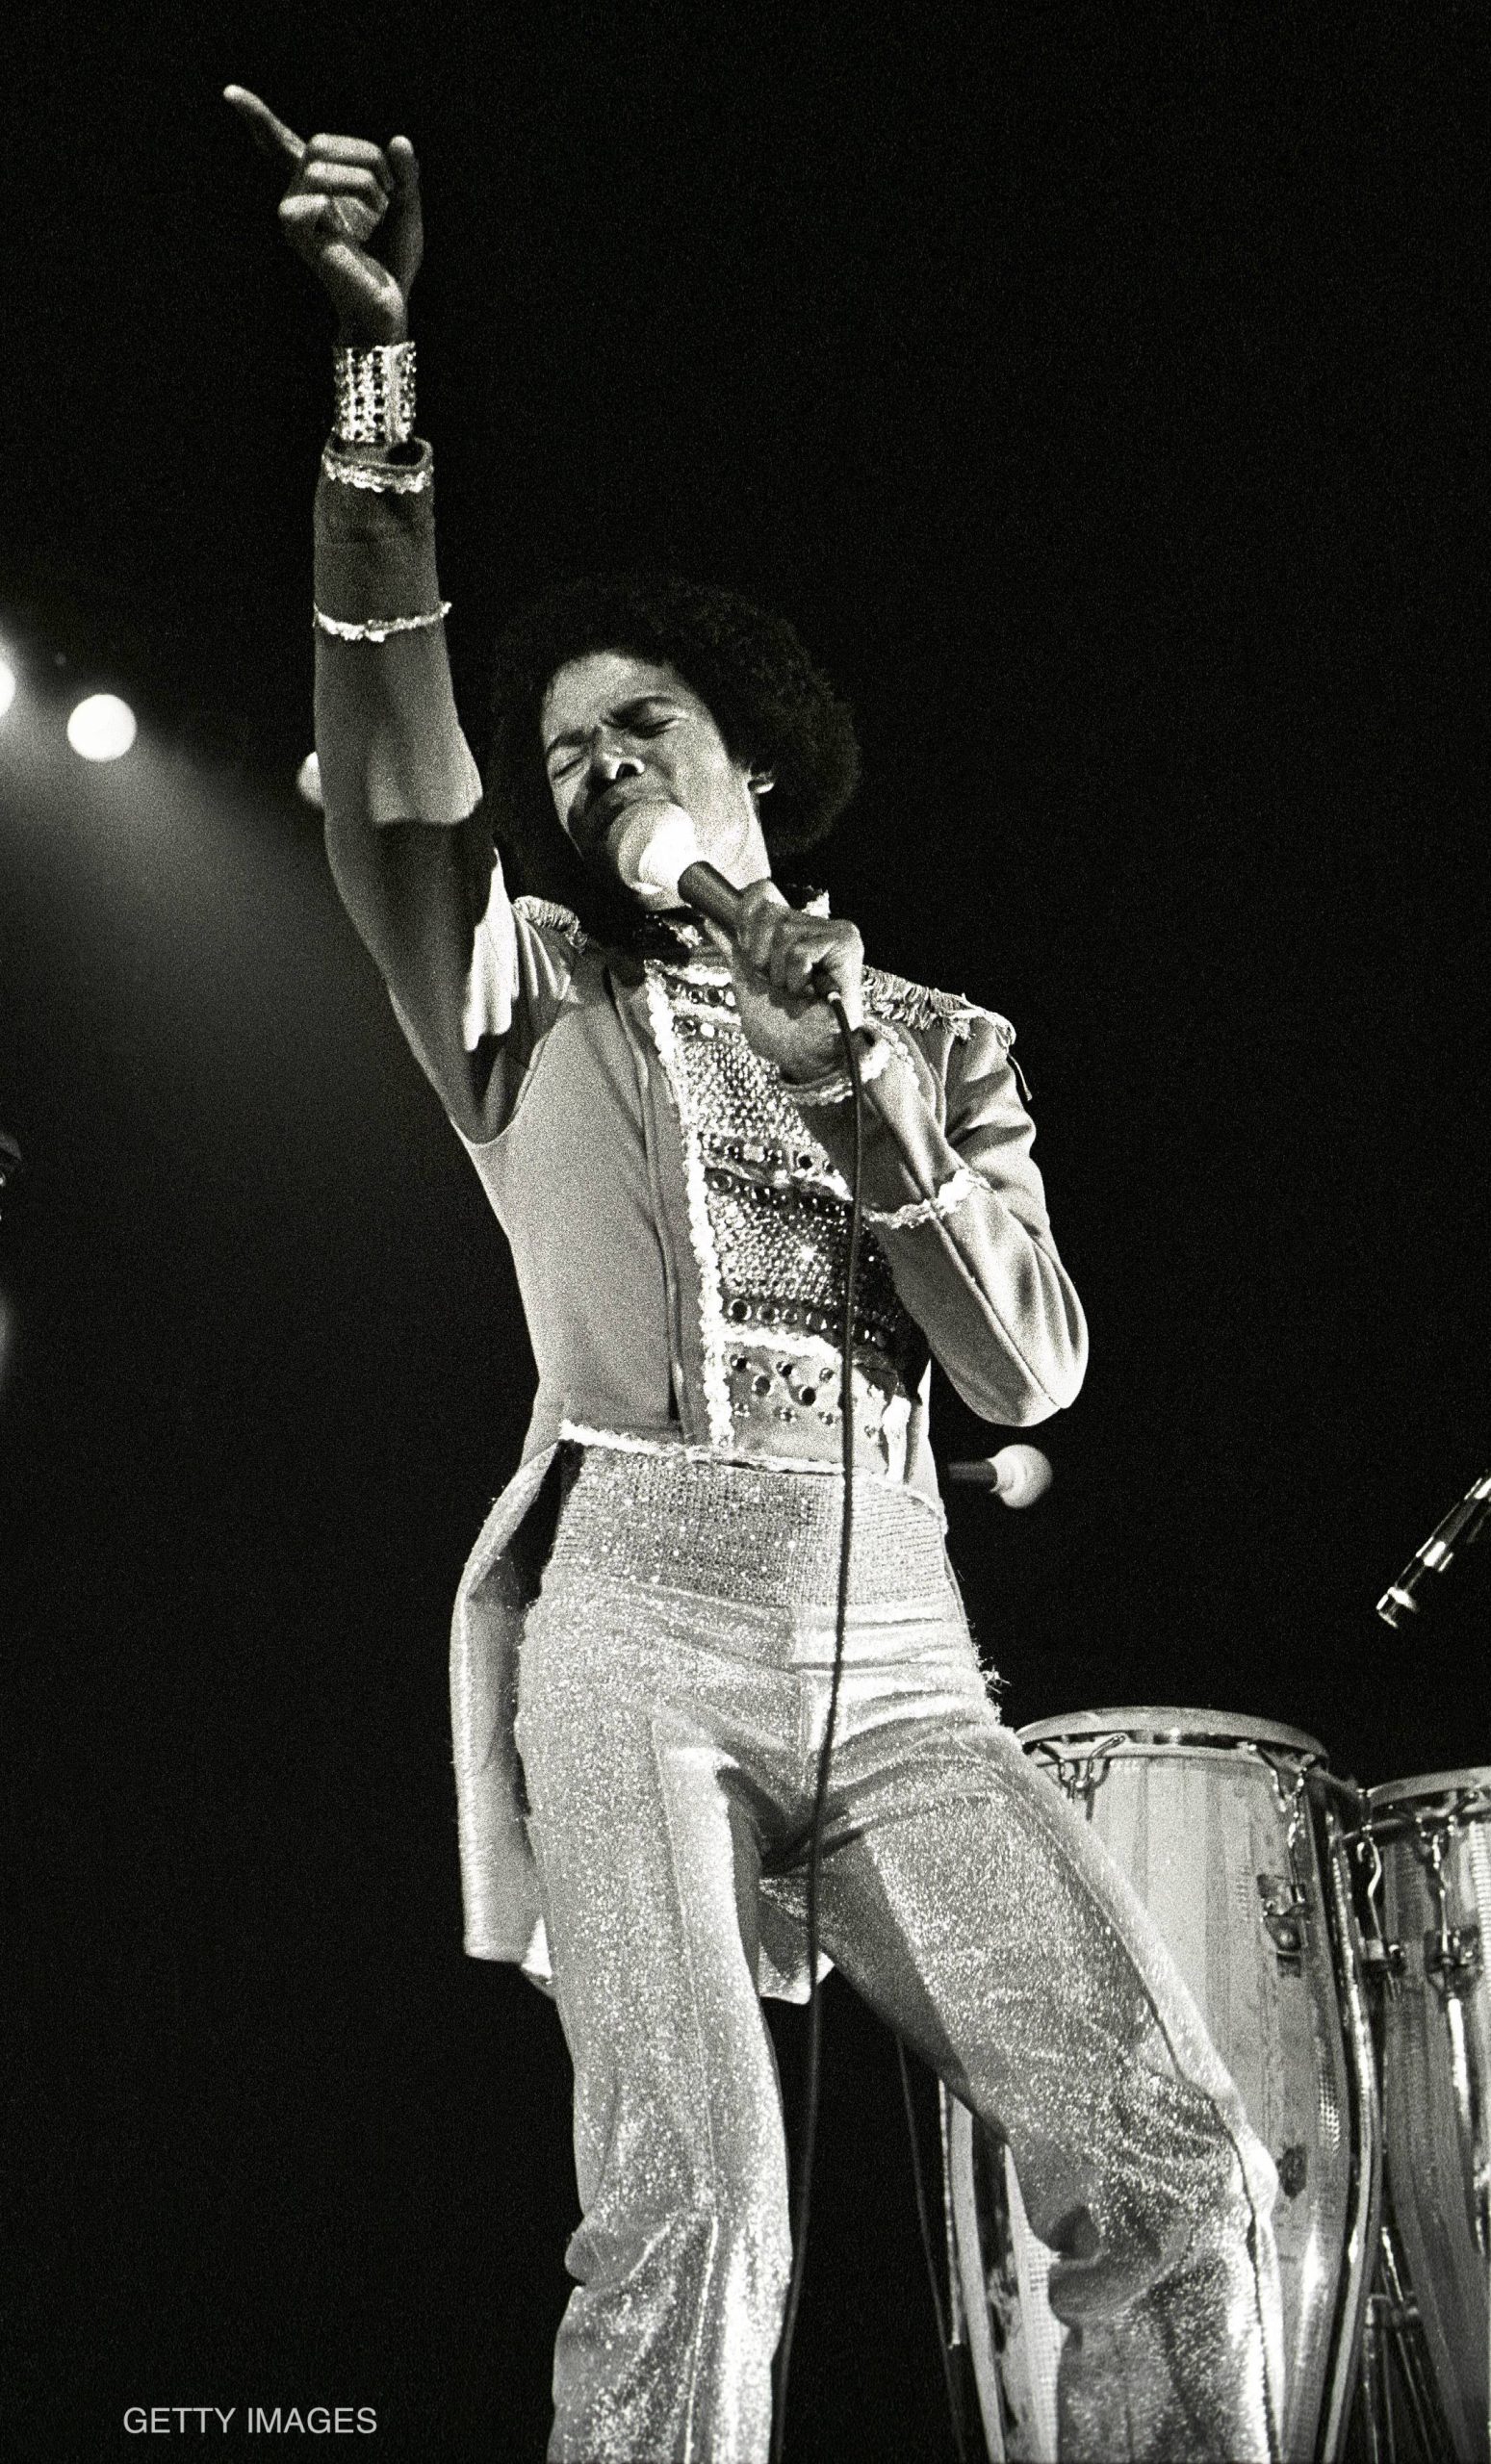 Michael Jackson performs with The Jacksons on Destiny World Tour at Carre Theatre in Amsterdam, The Netherlands February 26, 1979